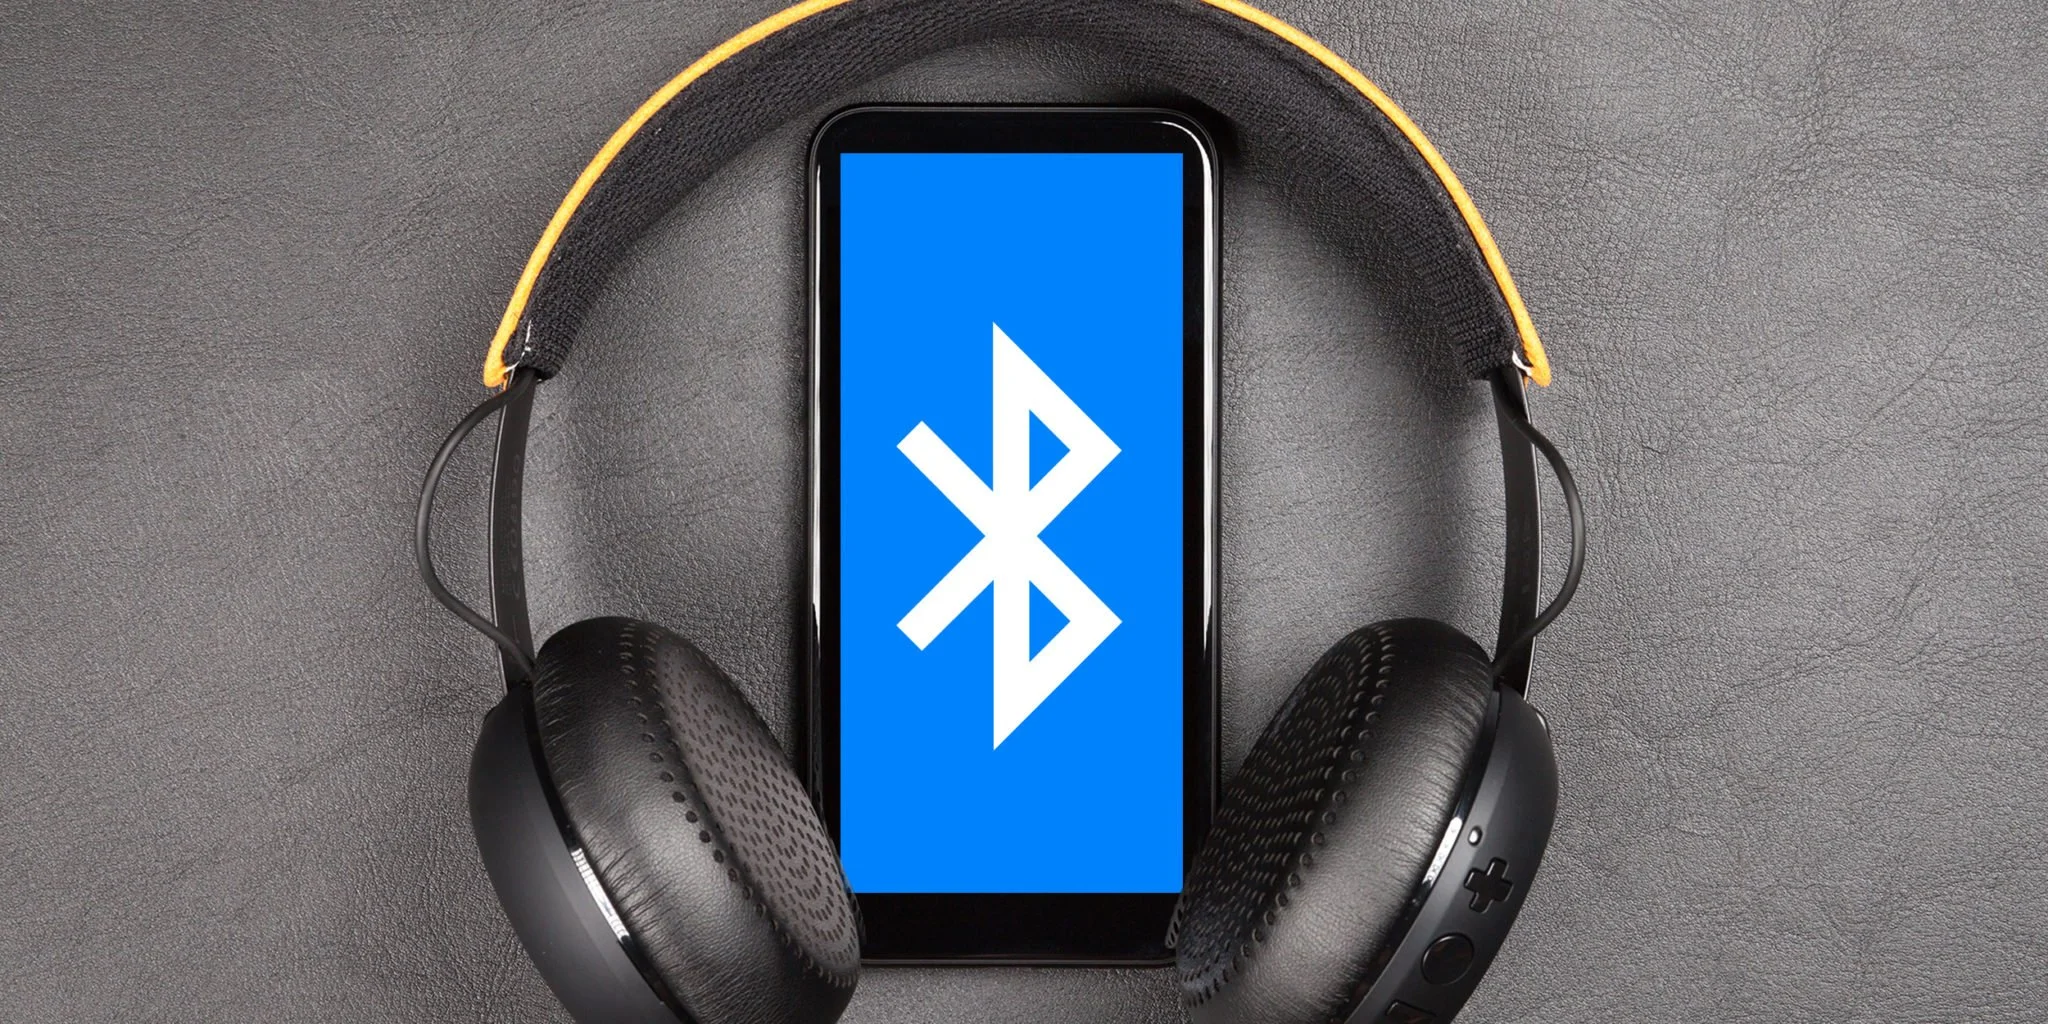 A bluetooth connection image